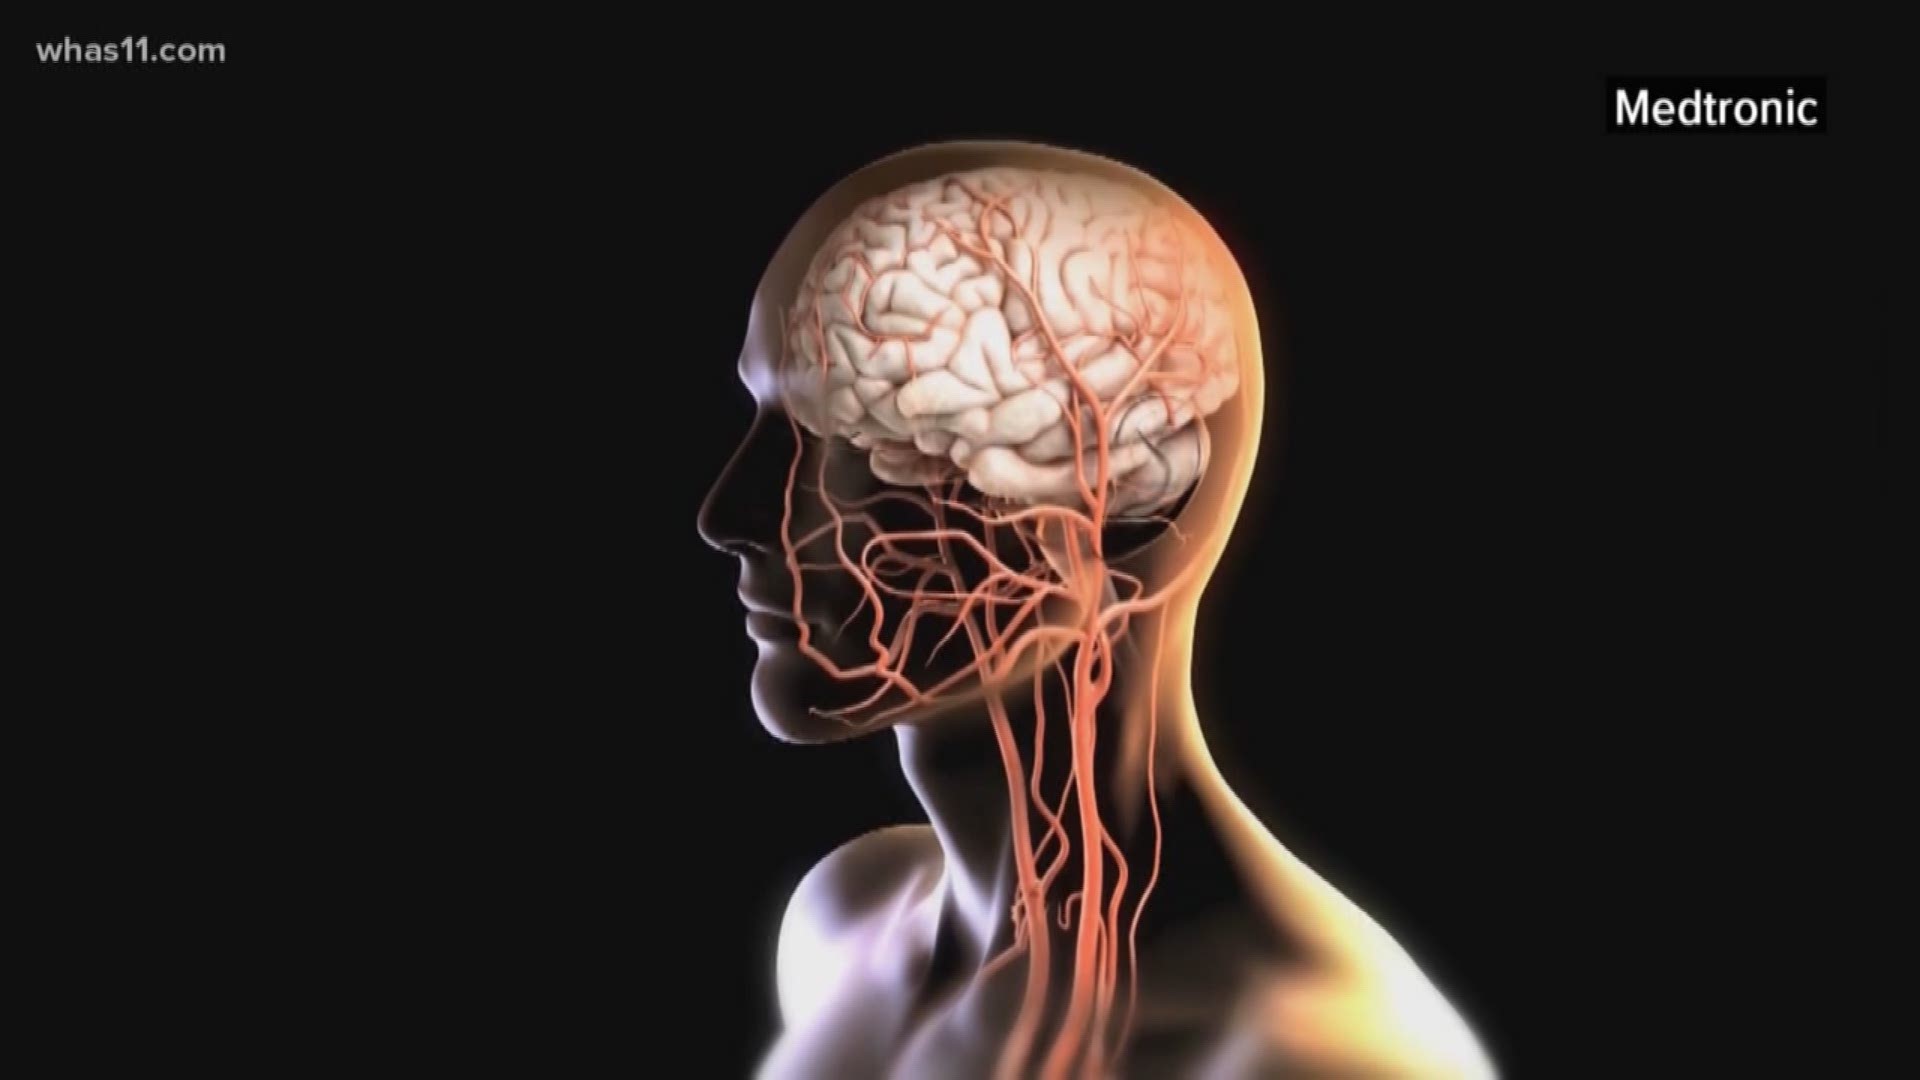 May is Stroke Awareness Month. Today WHAS11's Juliana Valencia talked with Dr. Jignesh Shah, a neurologist with the University of Louisville, about how to detect the signs of a stroke.